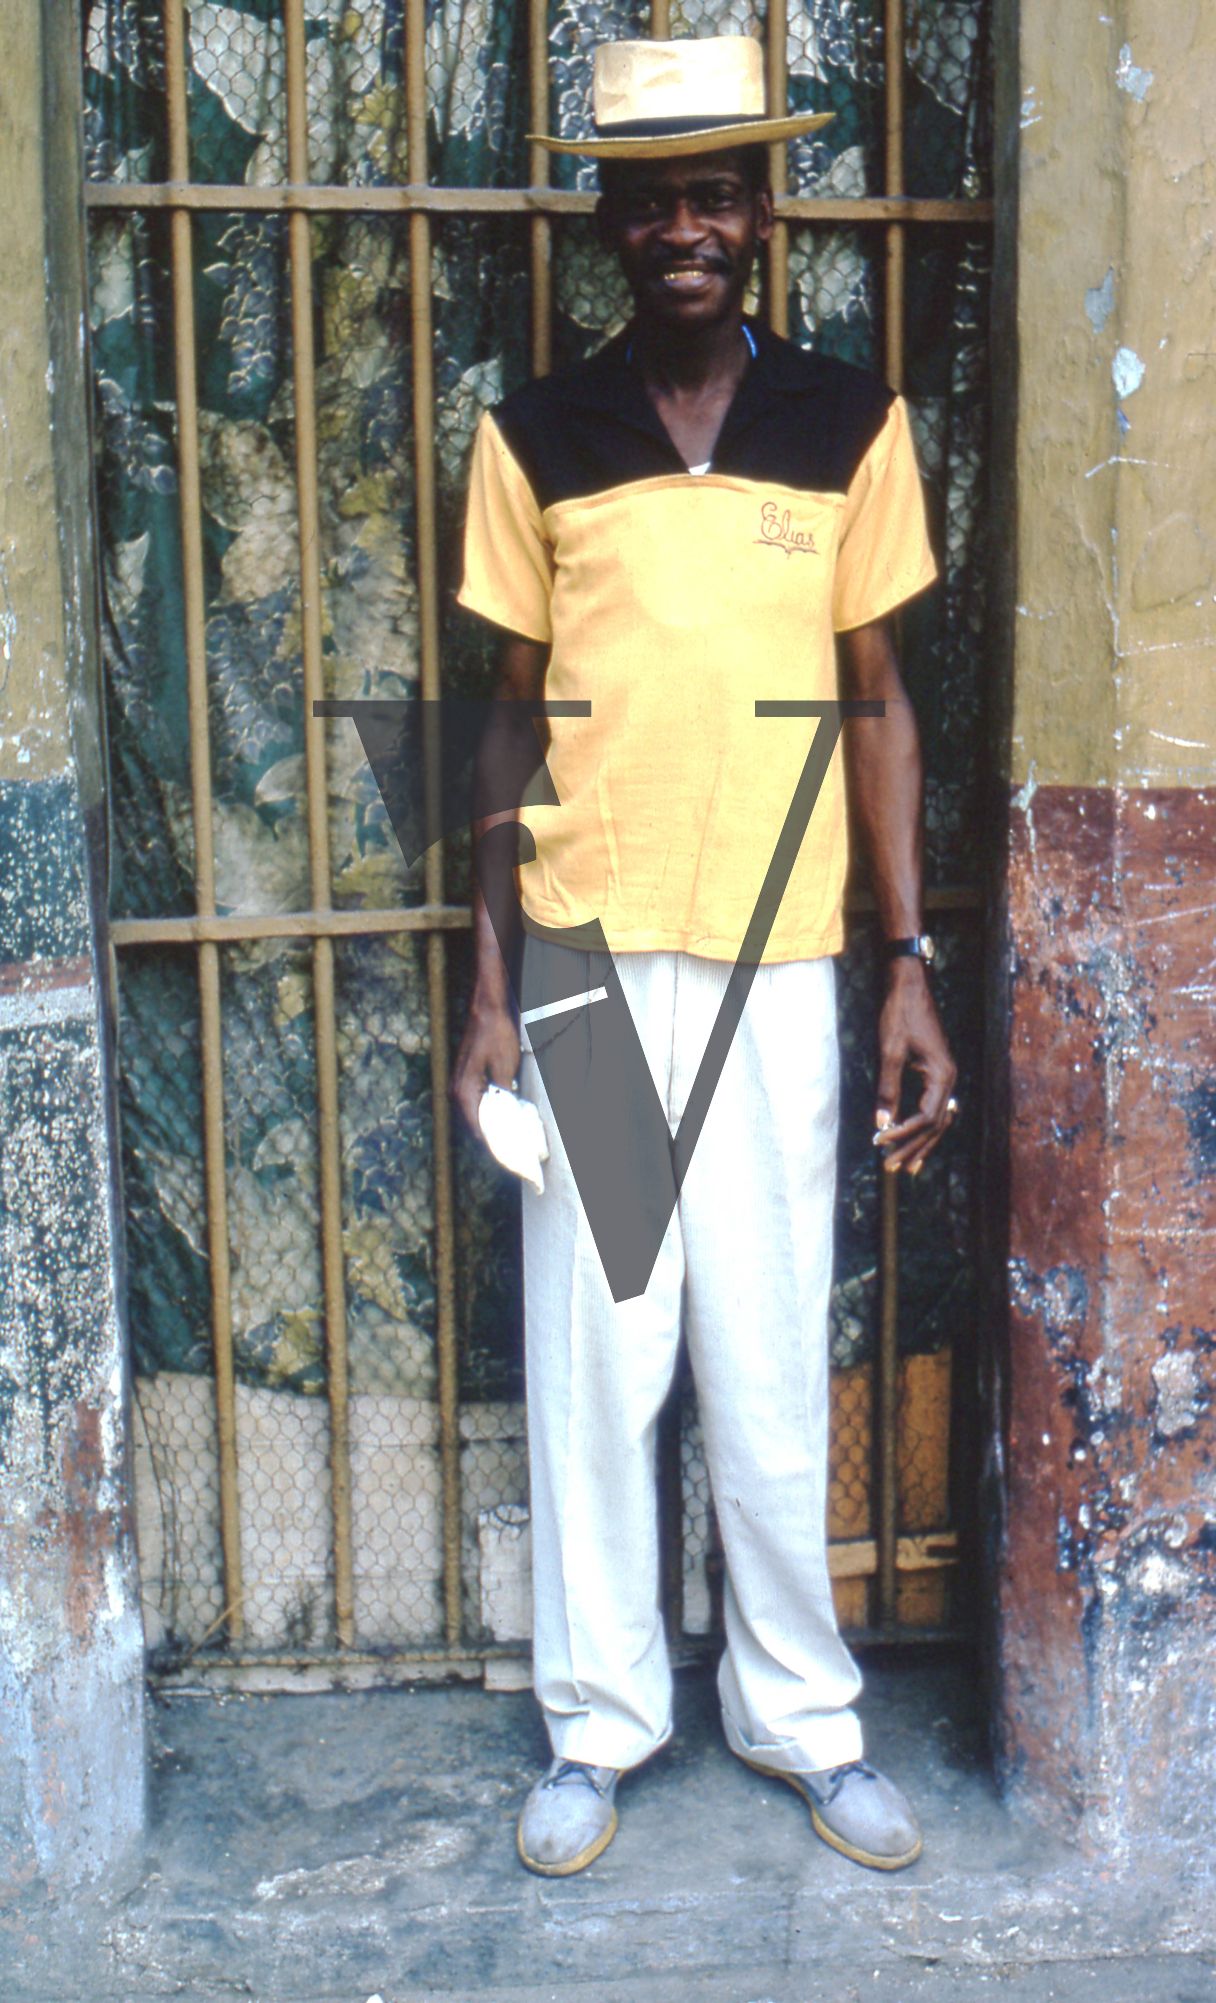 Cuba, Havana, May 1st, man in yellow and black smiling, portrait.